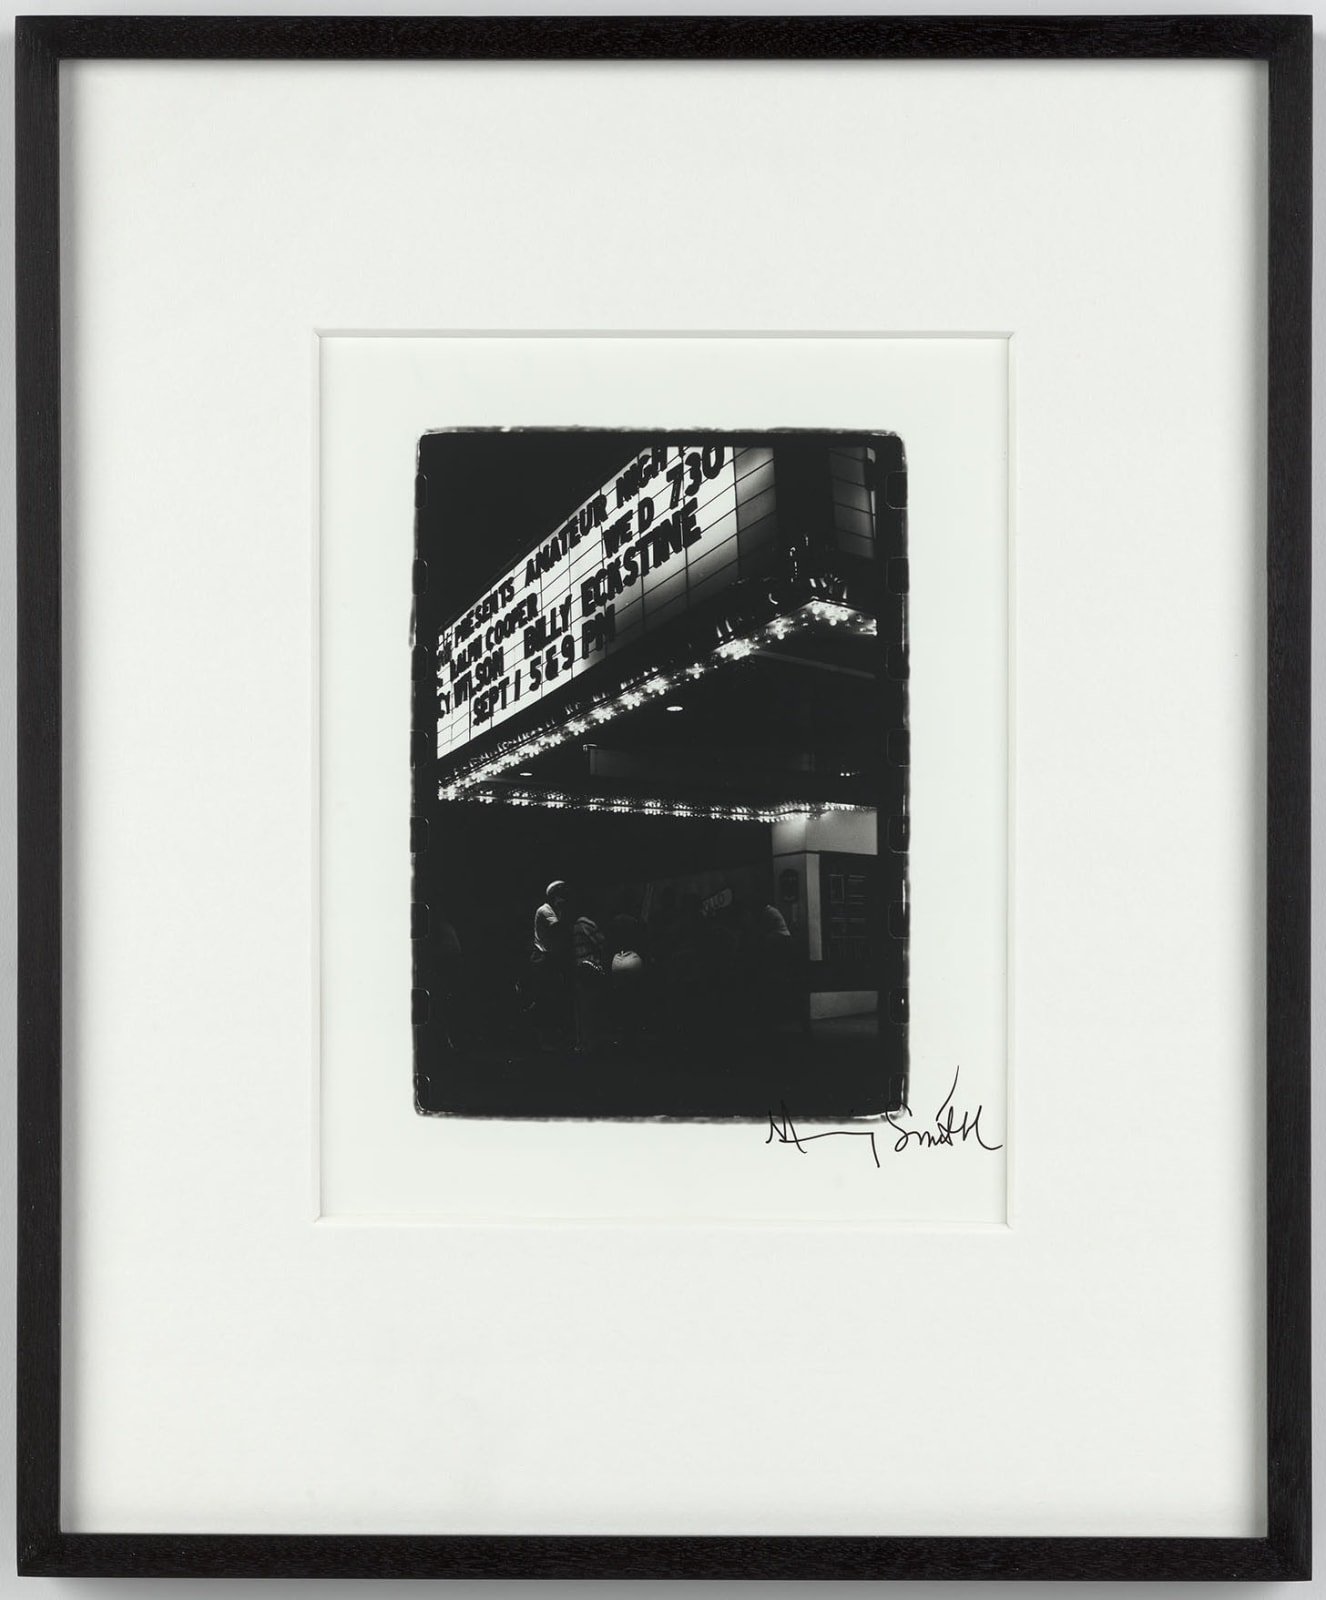 Ming Smith, Billboard at the Apollo Theater (Invisible Man series), 1988-91